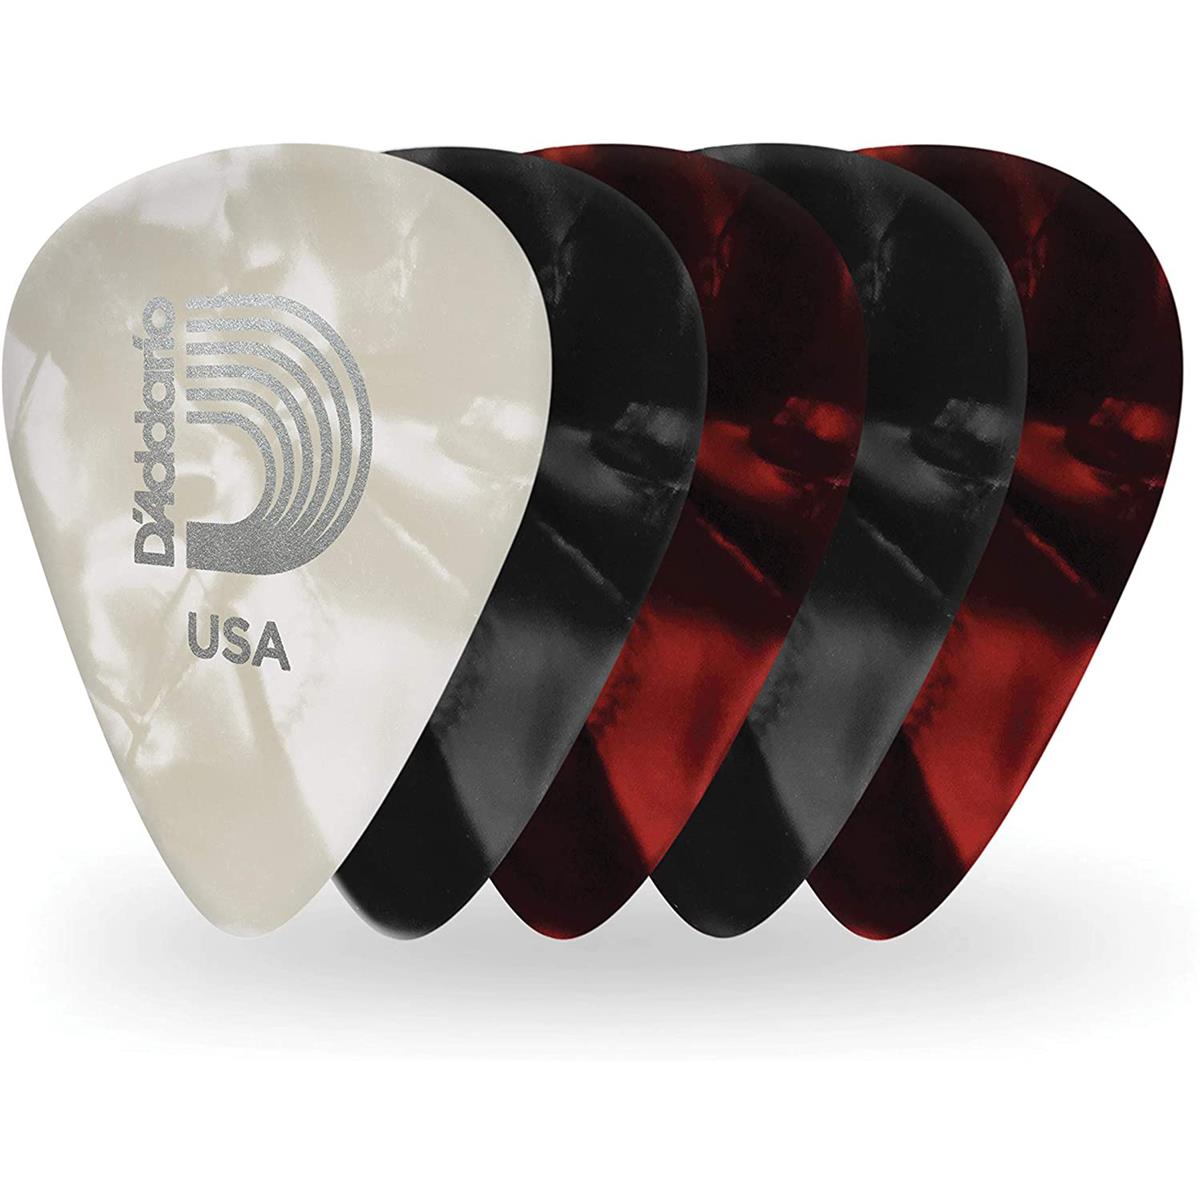 Image of D'Addario Classic Pearl Celluloid Picks Assortment